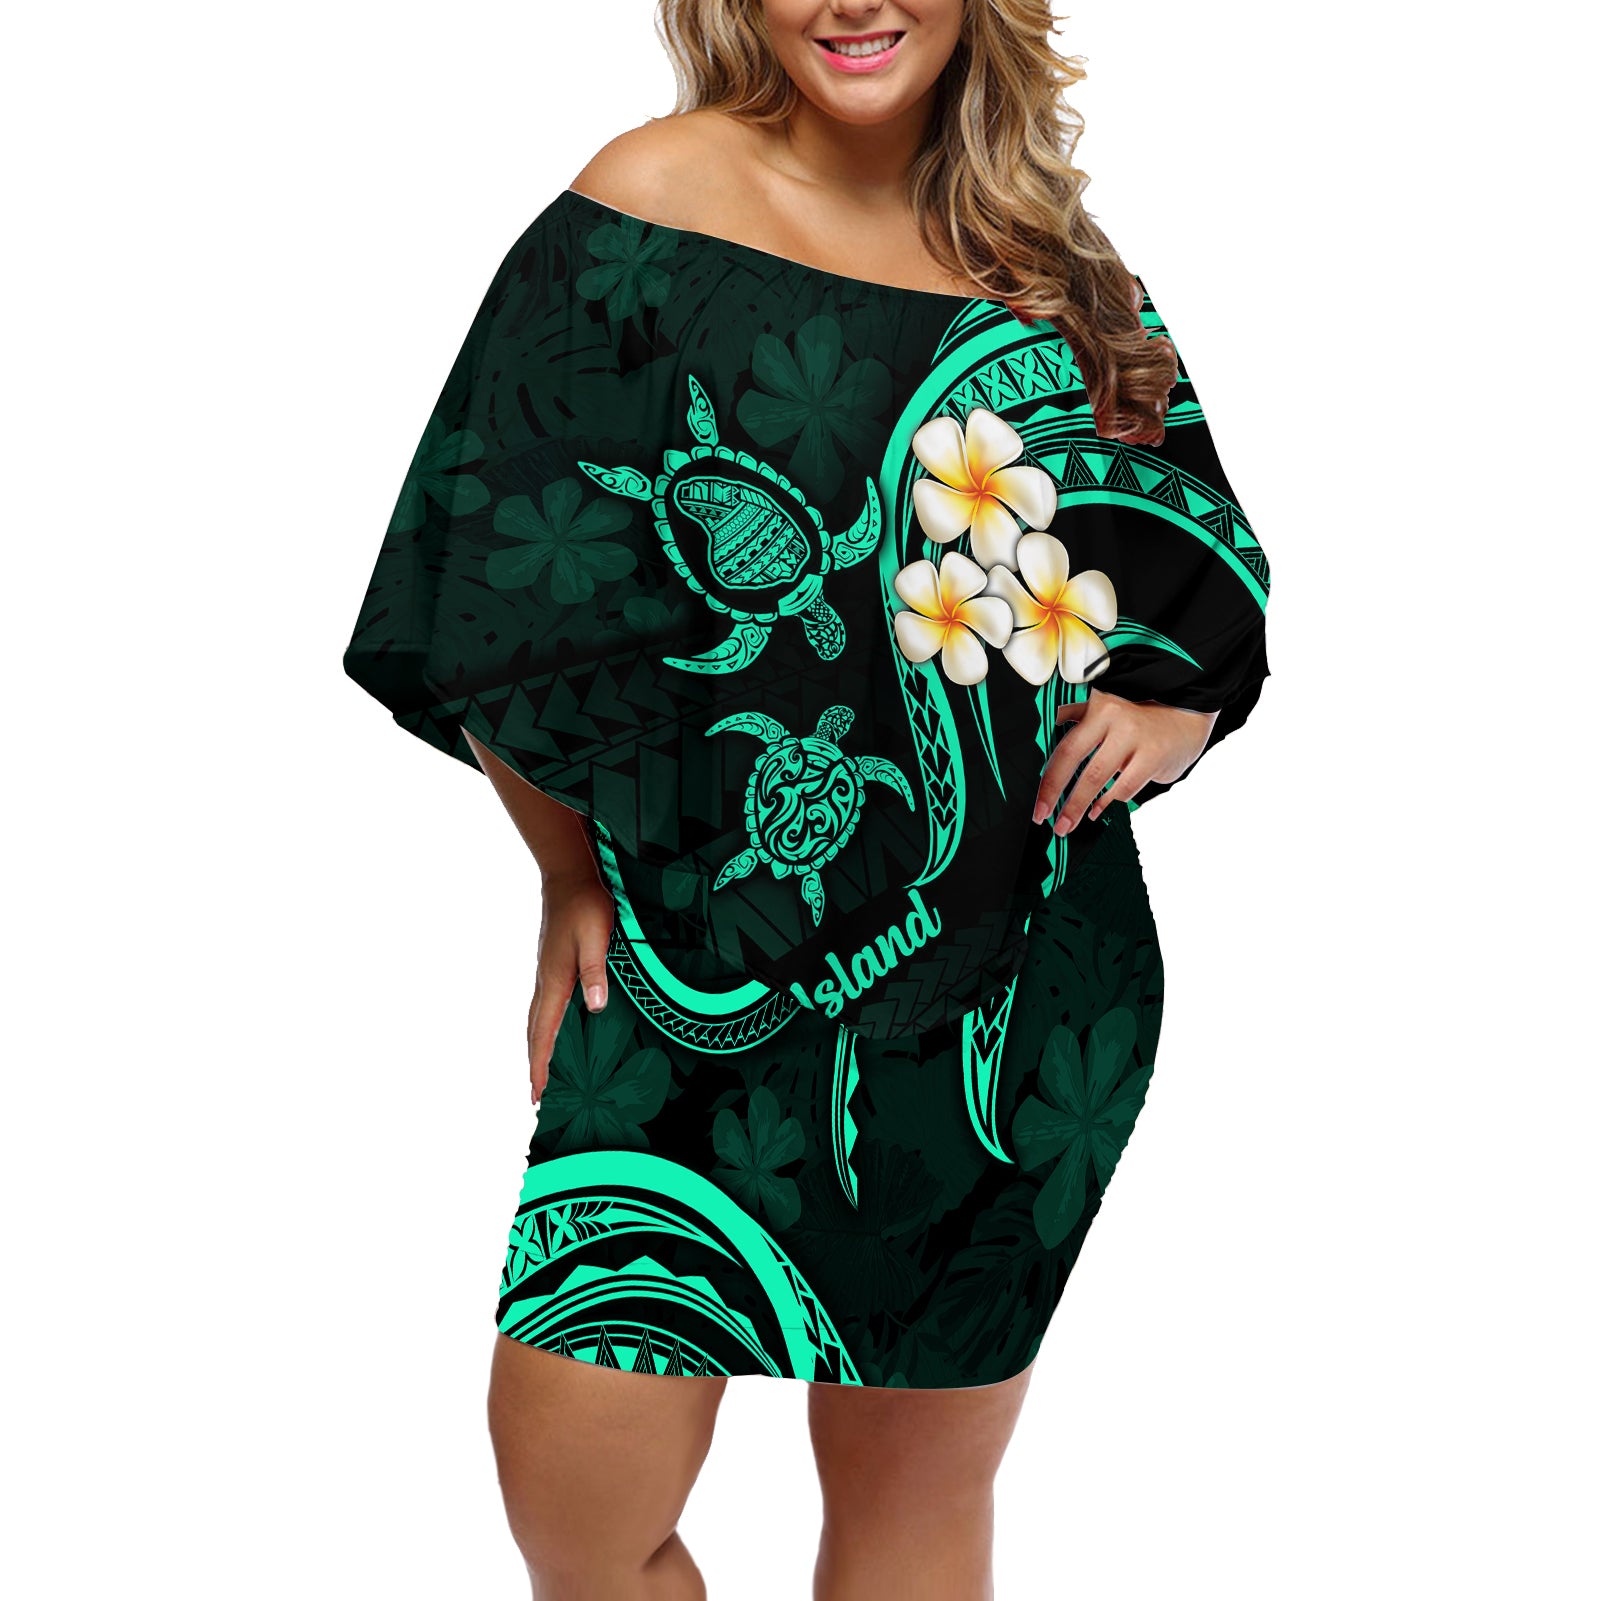 Polynesian Hawaii Off Shoulder Short Dress Lanai Islands with Pacific Plumeria Turquoise Vibe LT9 Women Turquoise - Polynesian Pride